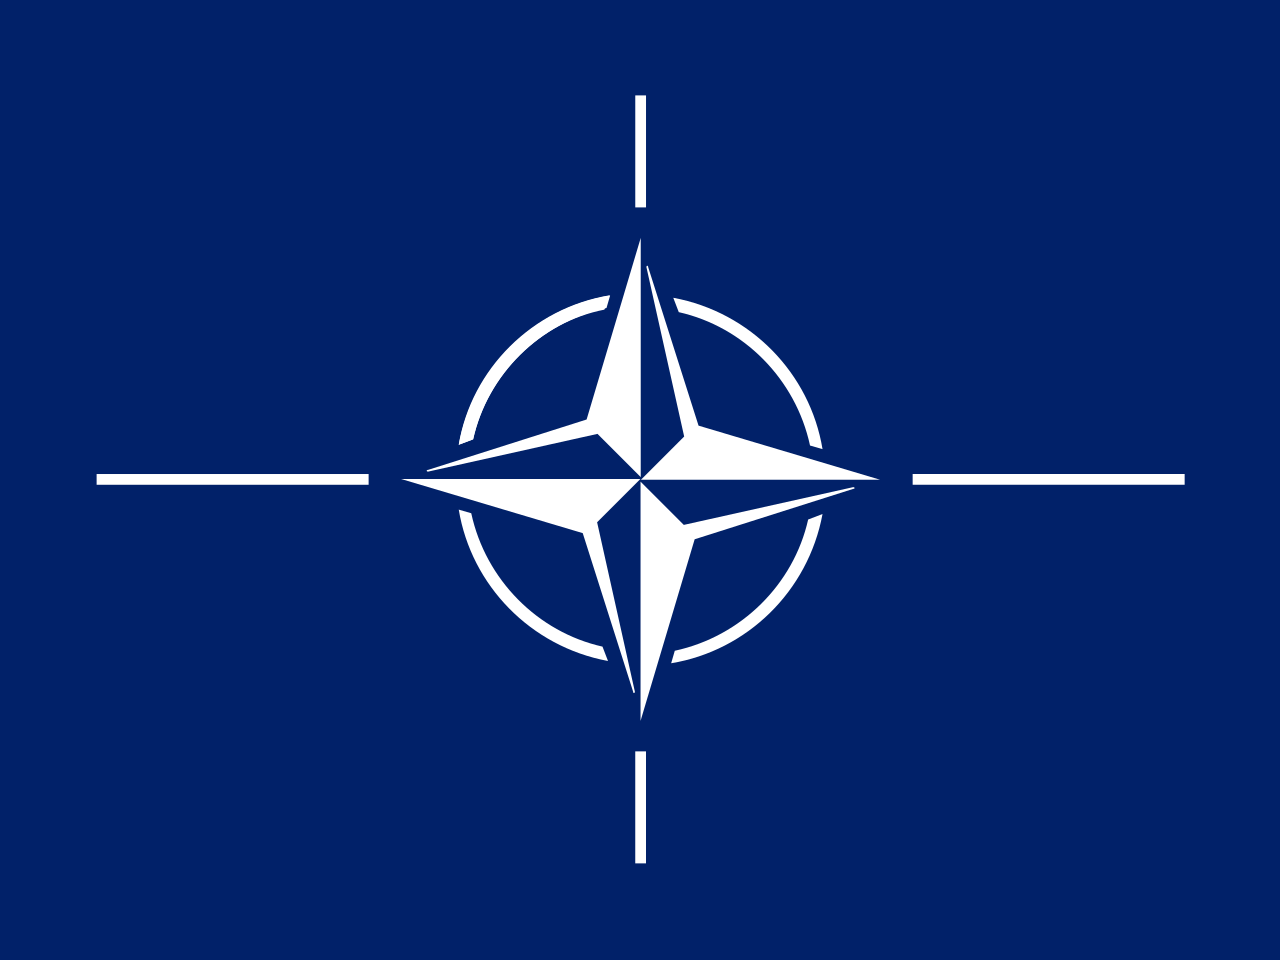 East Asian countries should reject NATO’s expanding tentacles: media